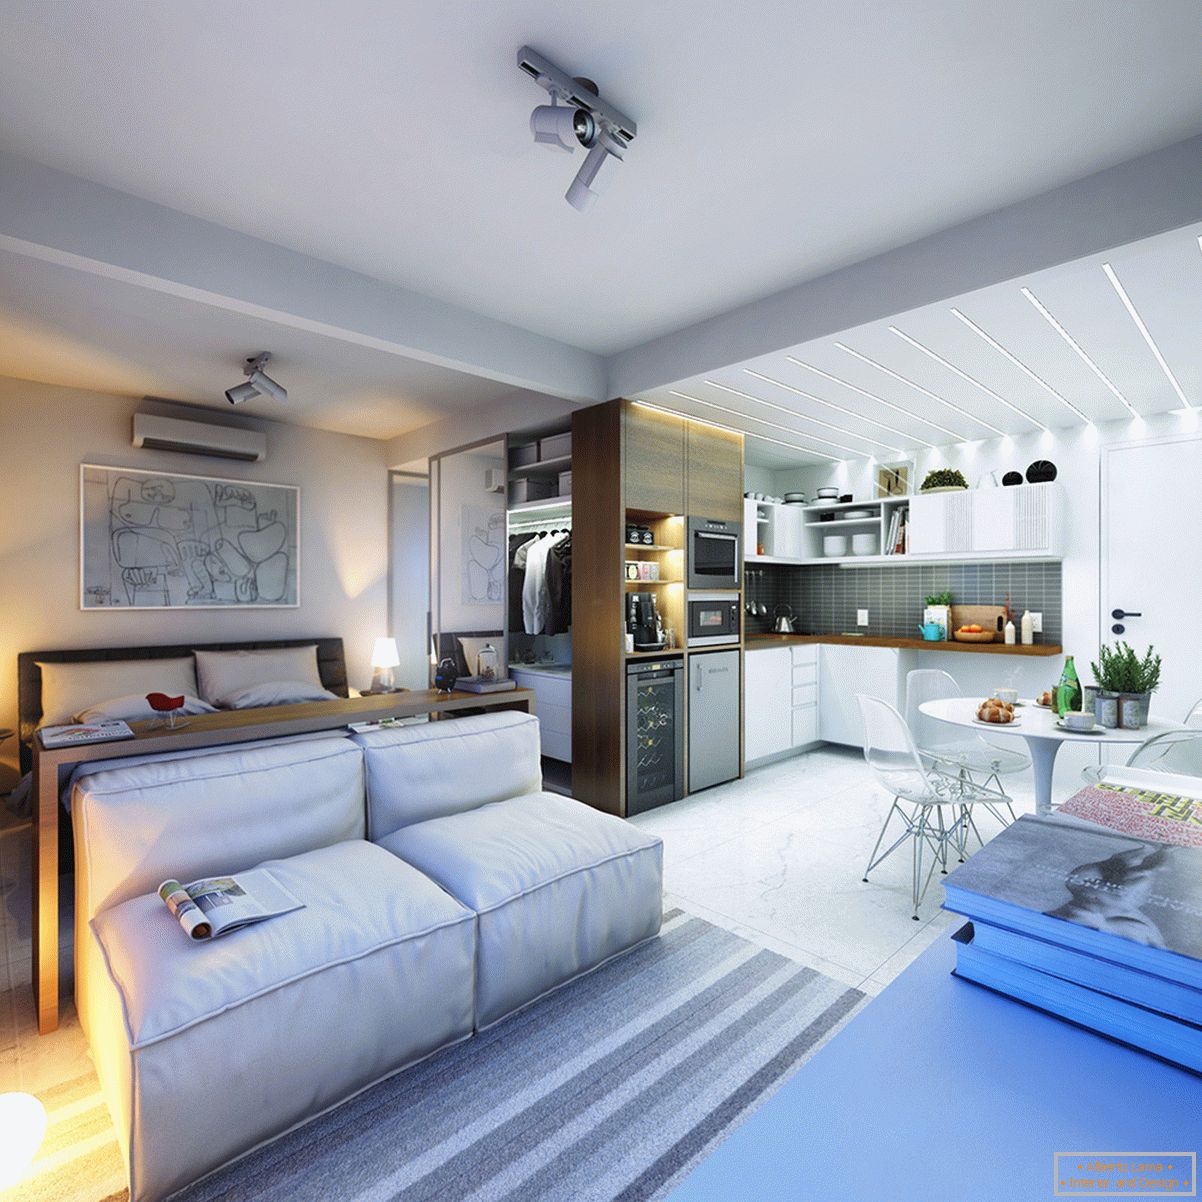 Design of a tiny apartment in bright colors